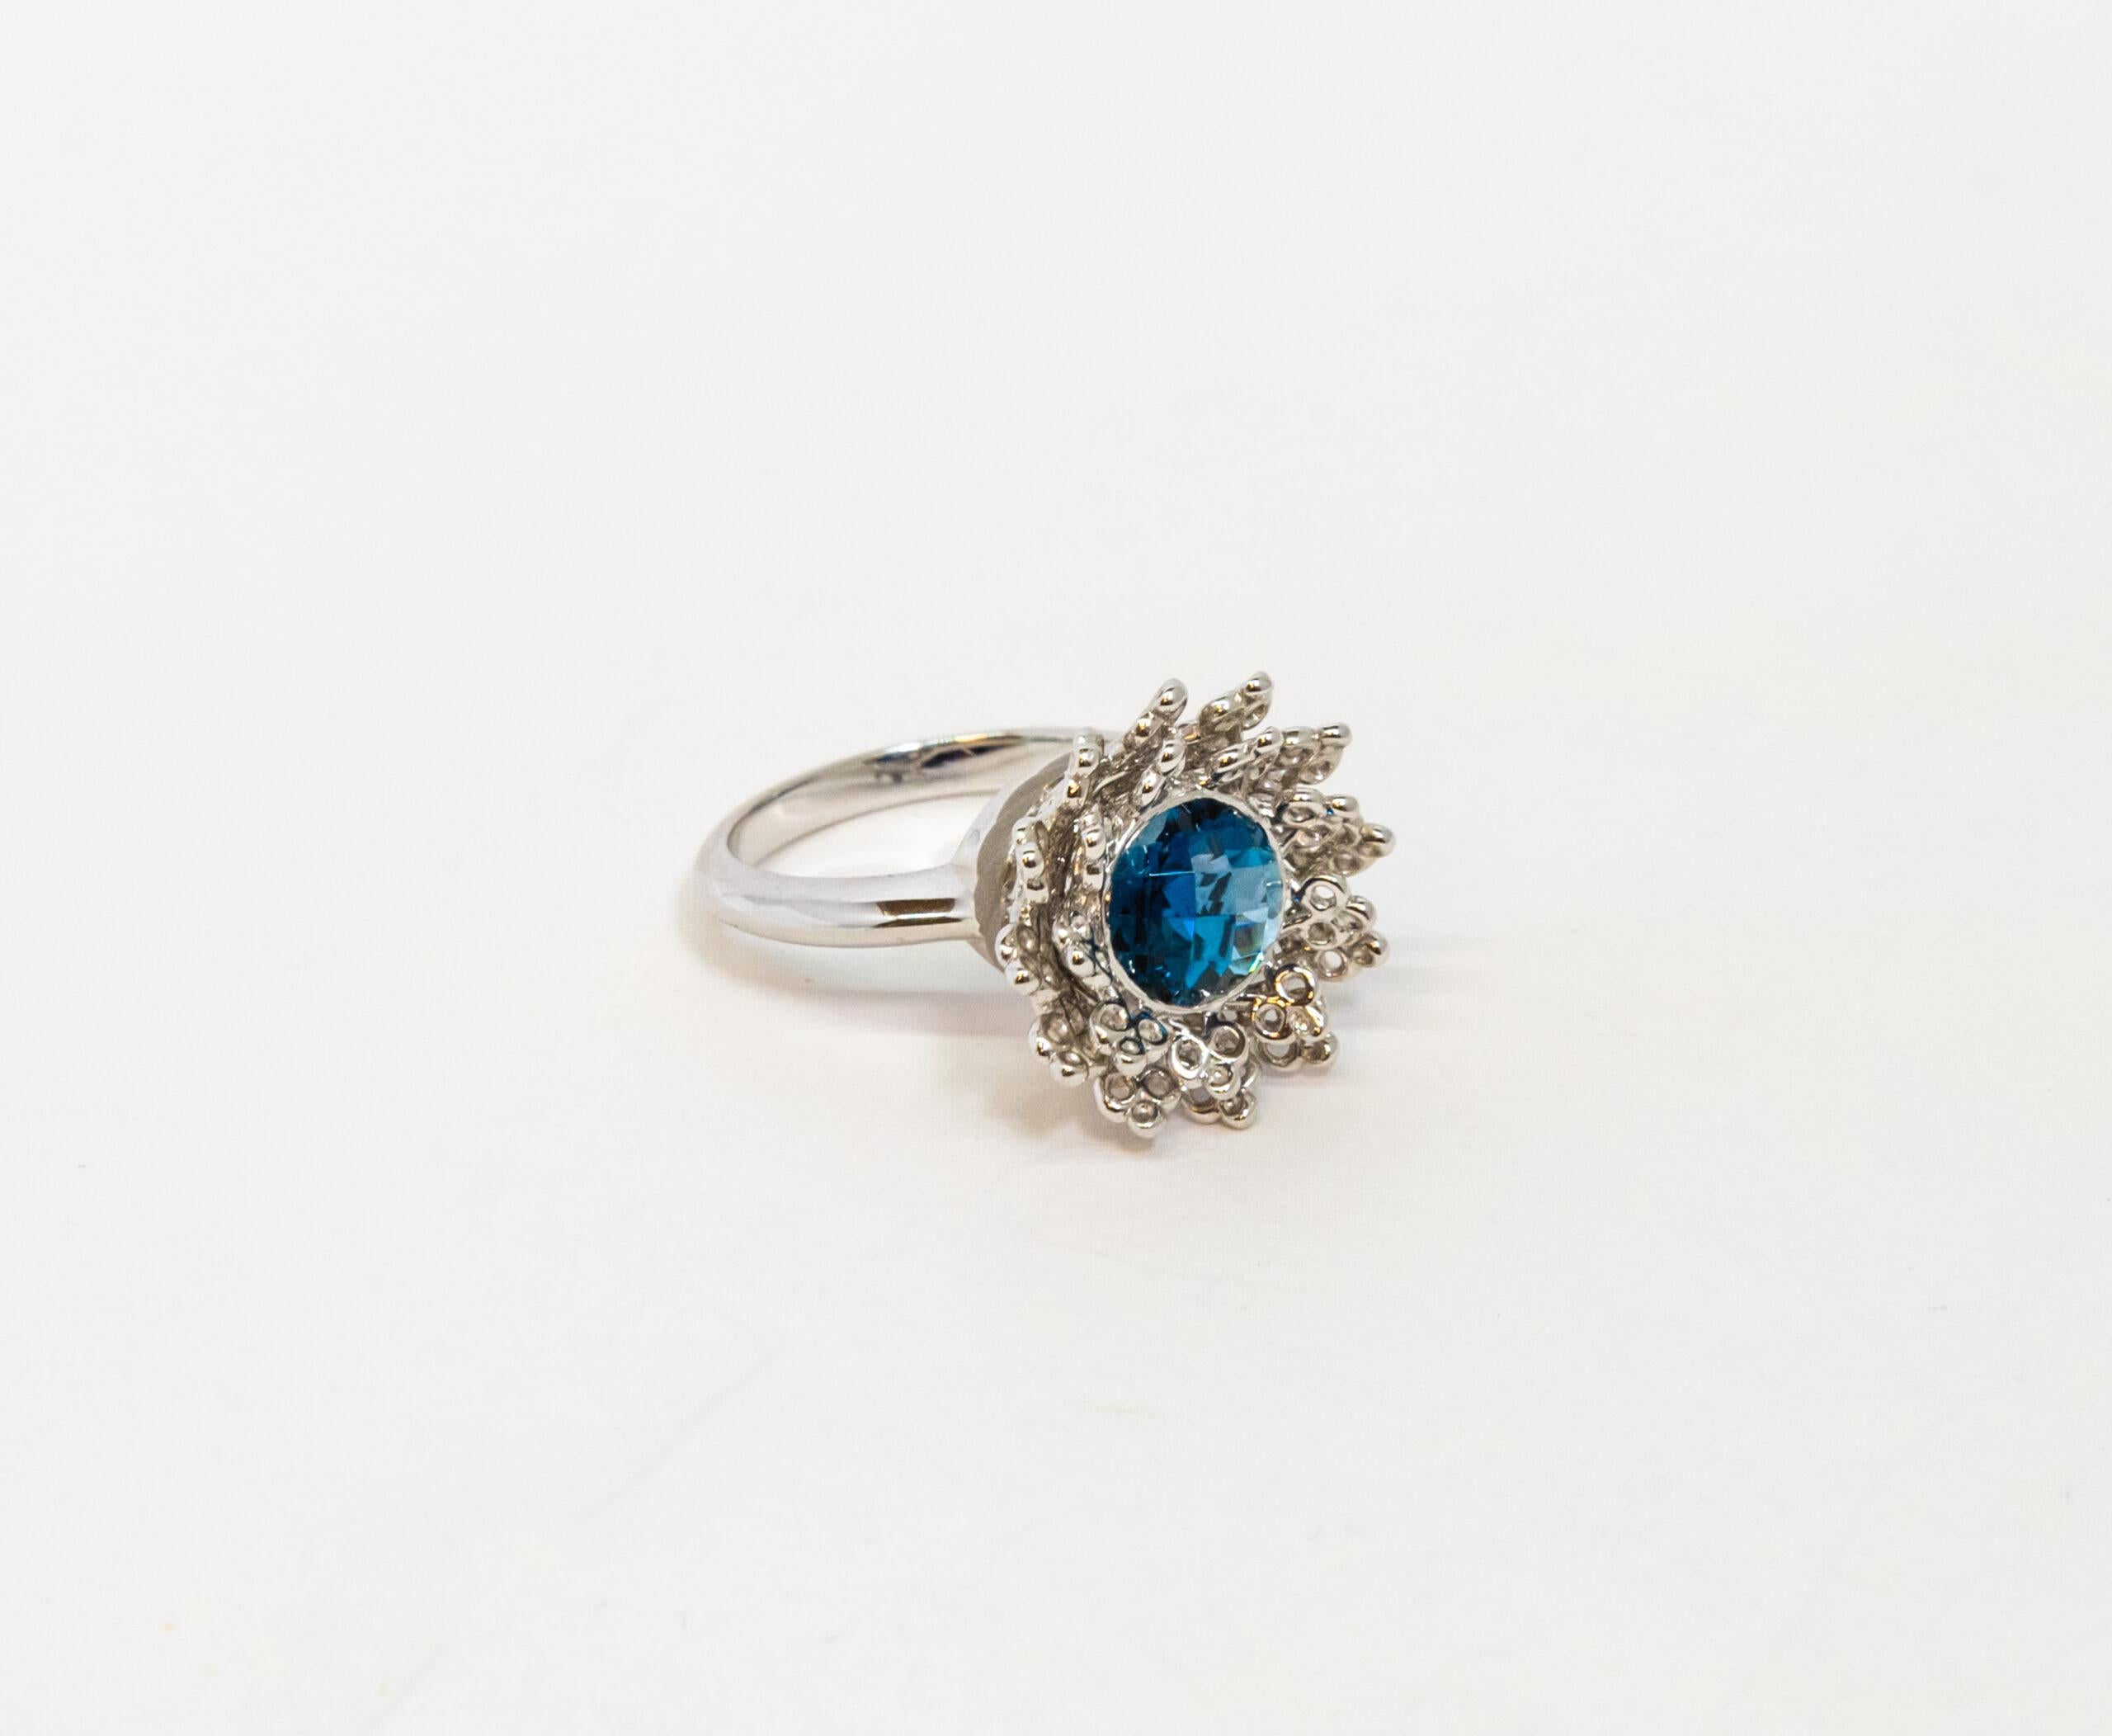 This ring is made of 18K White Gold. It is a crown-shaped ring with round-cut Blue Topaz (~ 2.39ct).

Size – 54.5 (7 US)